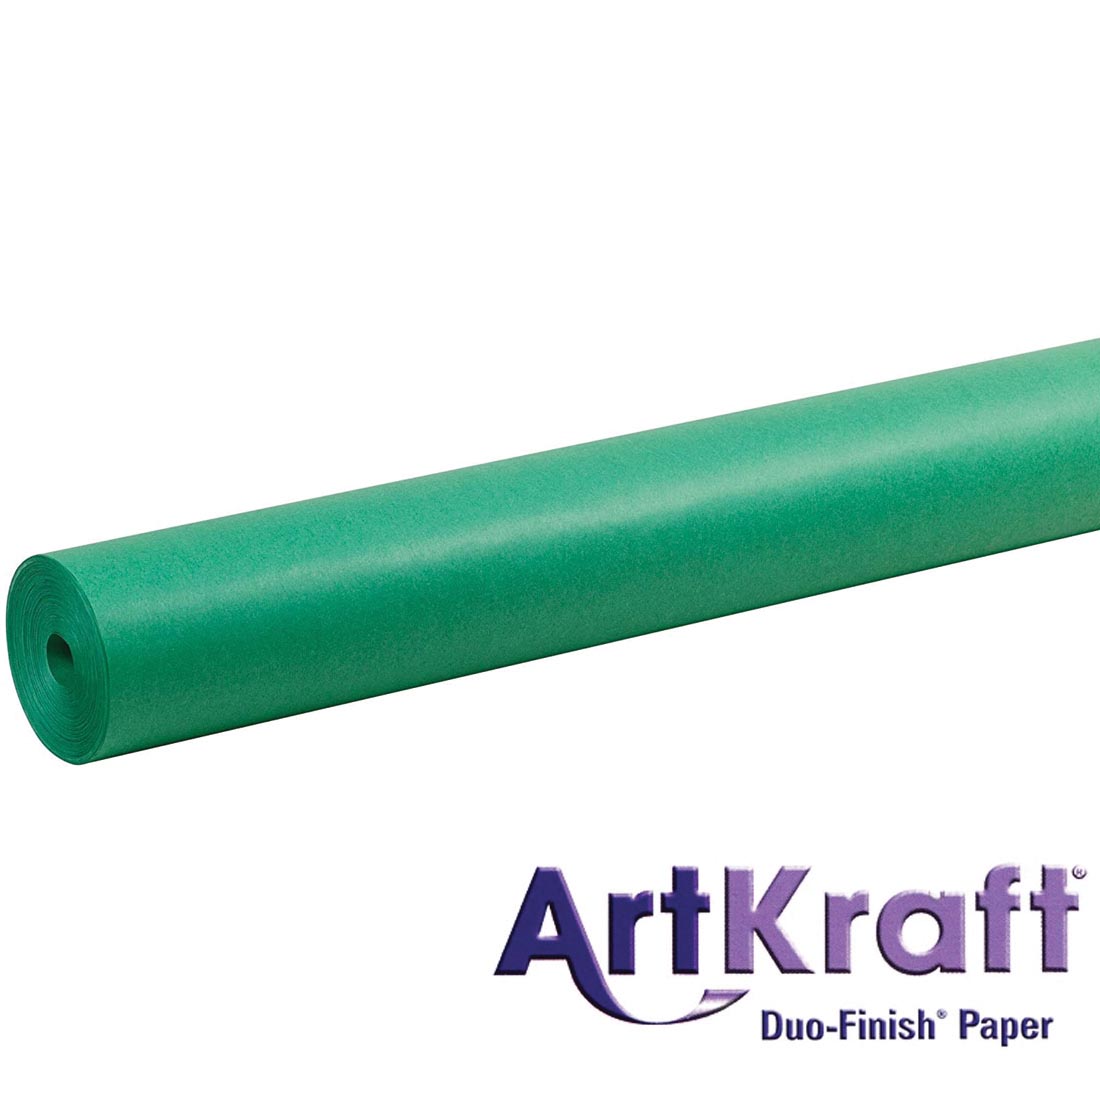 Roll of Brite Green Paper with text ArtKraft Duo-Finish Paper